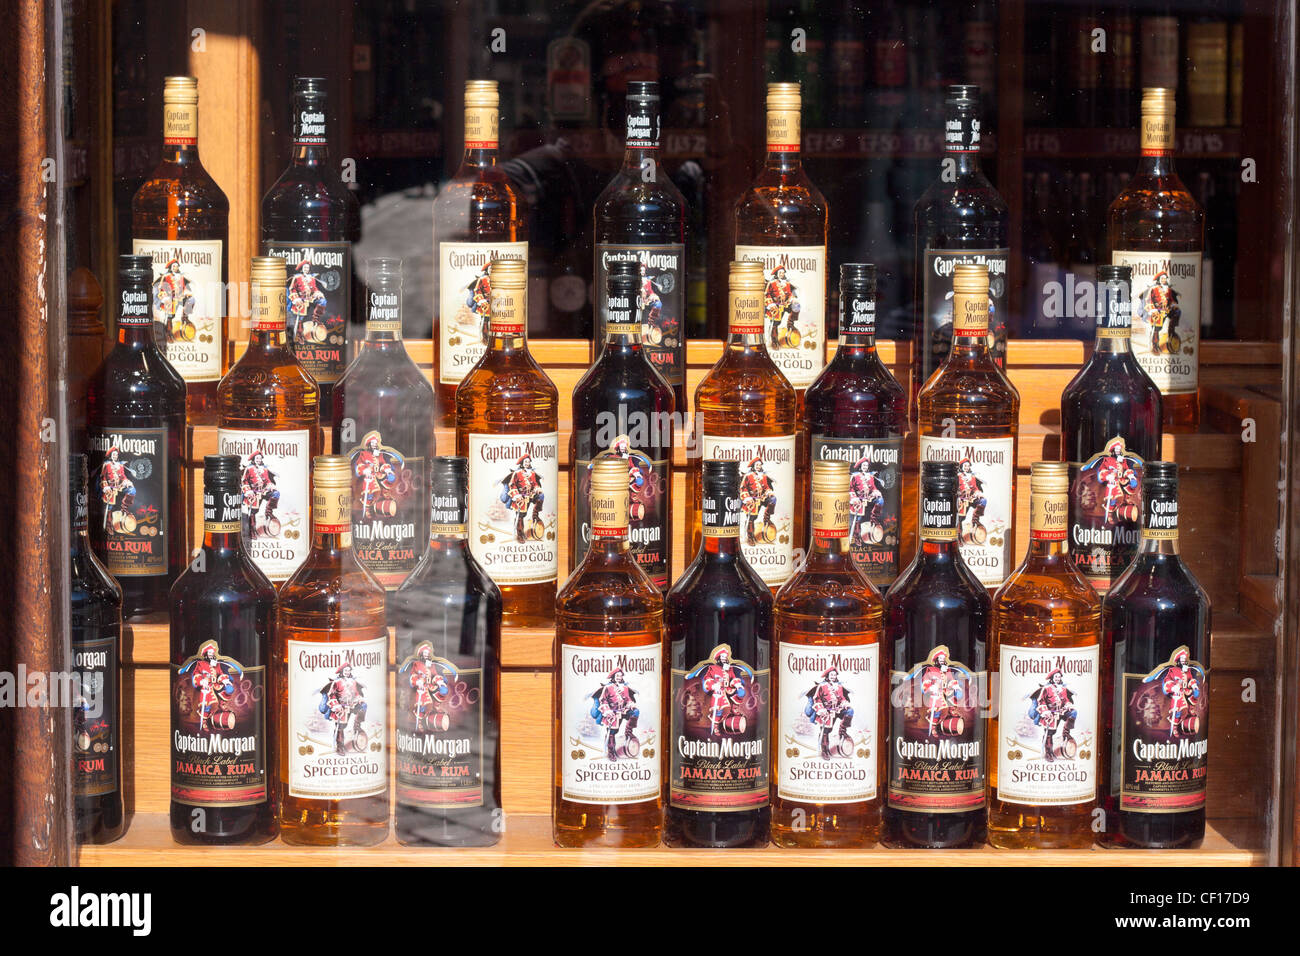 Duty free shop window with displayed bottles of Captain Morgan Stock Photo  - Alamy